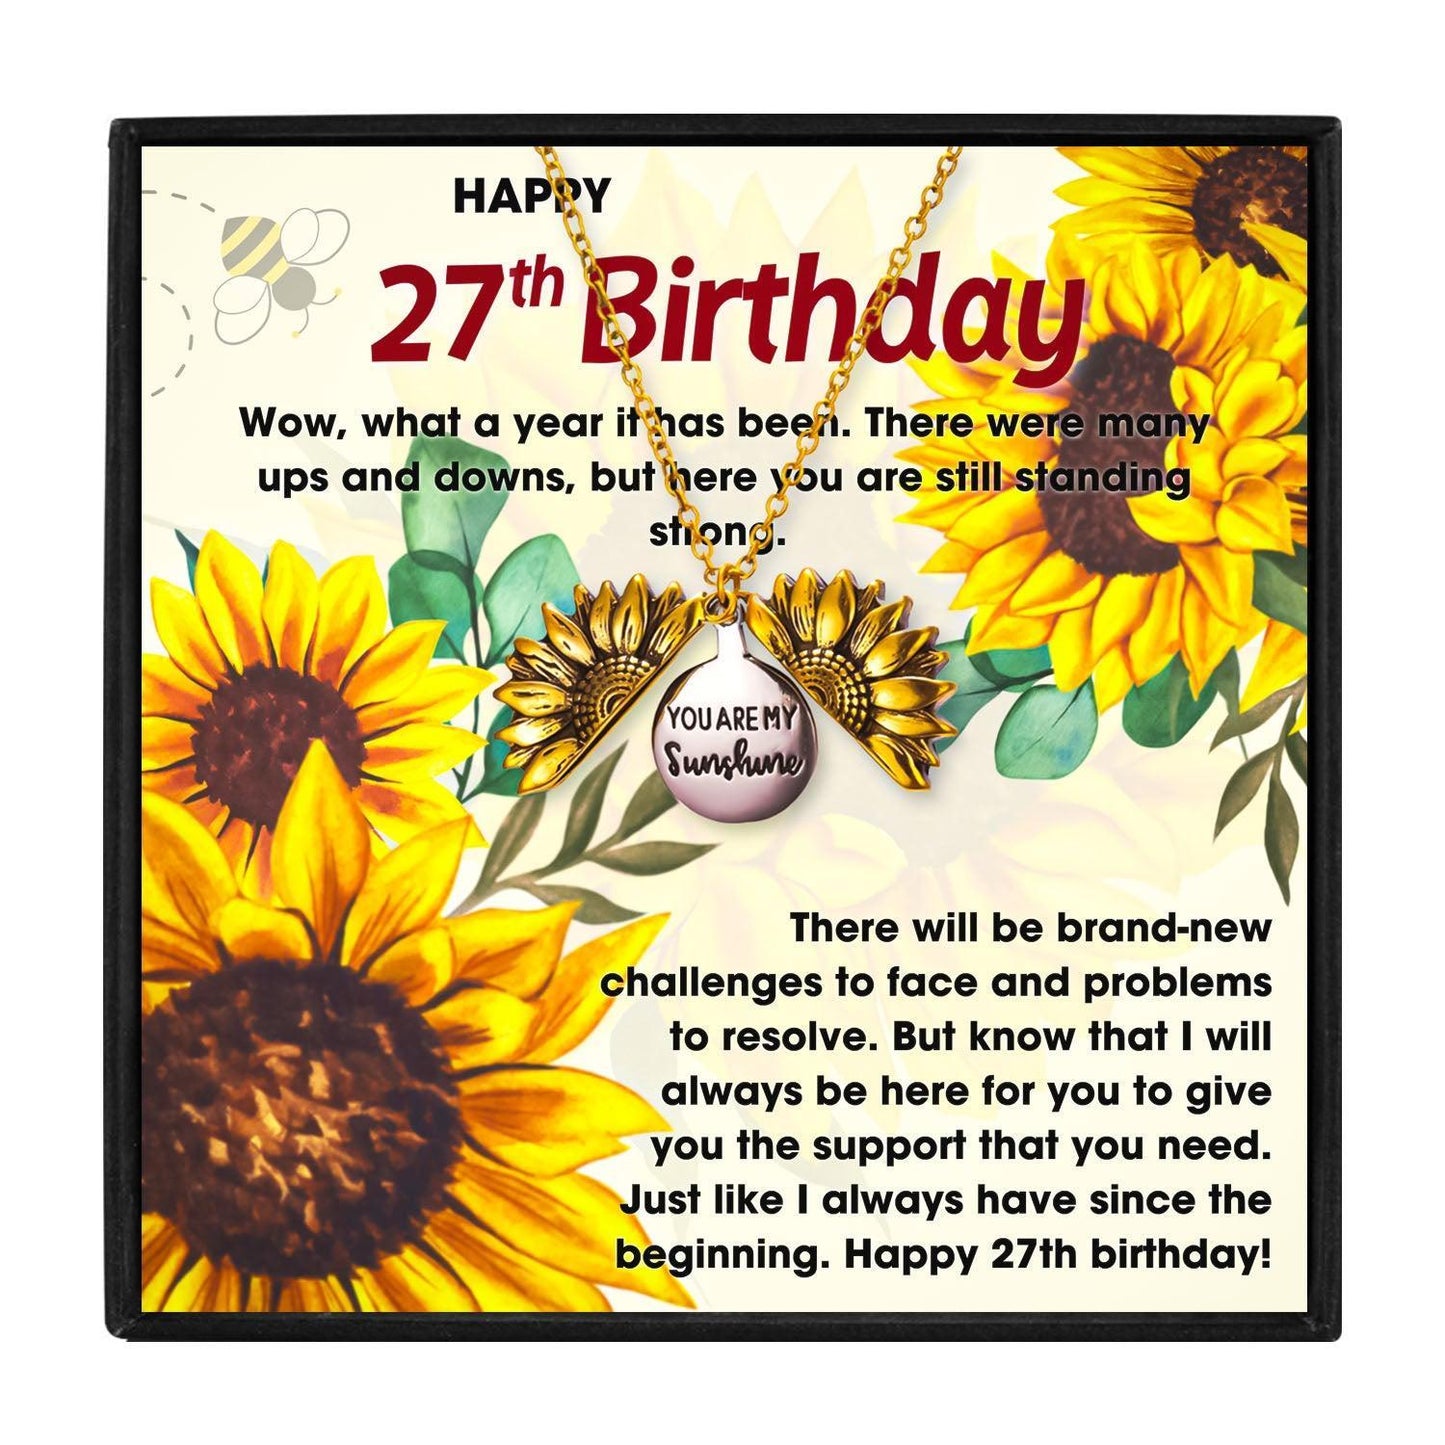 27th Birthday Gifts for Her That Are Thoughtful for Christmas 2023 | 27th Birthday Gifts for Her That Are Thoughtful - undefined | 27 birthday gift, 27th birthday gifts for her, 27th birthday ideas for her, birthday ideas for 27 | From Hunny Life | hunnylife.com